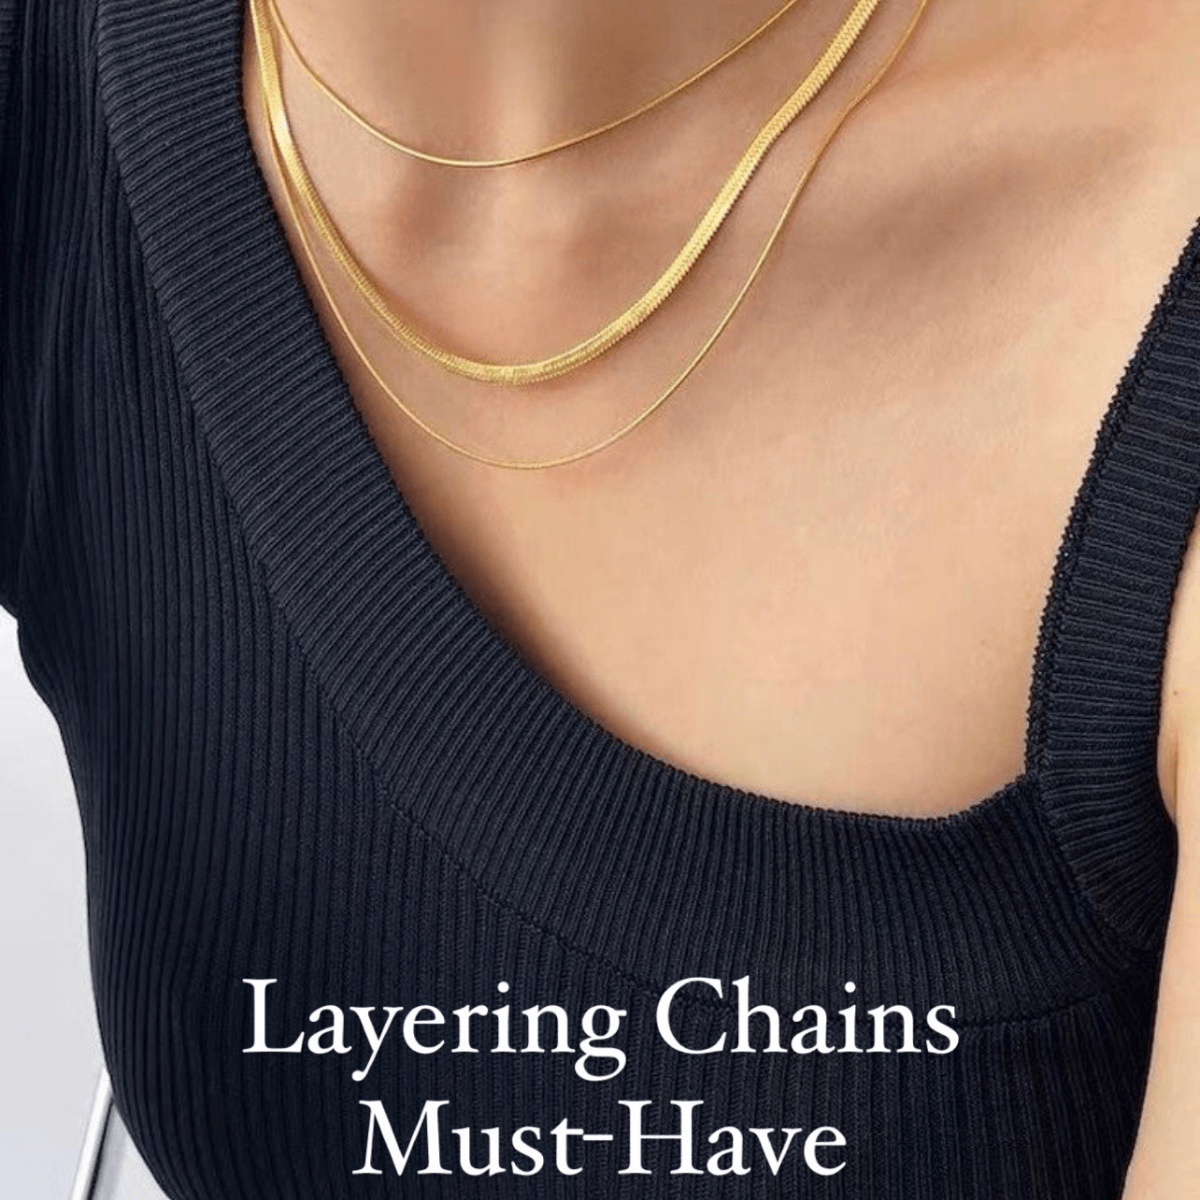 Best Gold Herringbone Snake Chain Layers Necklace Bundle Jewelry Gift | Best Aesthetic Yellow Gold Chain Necklace Jewelry Gift for Women, Mother,Wife